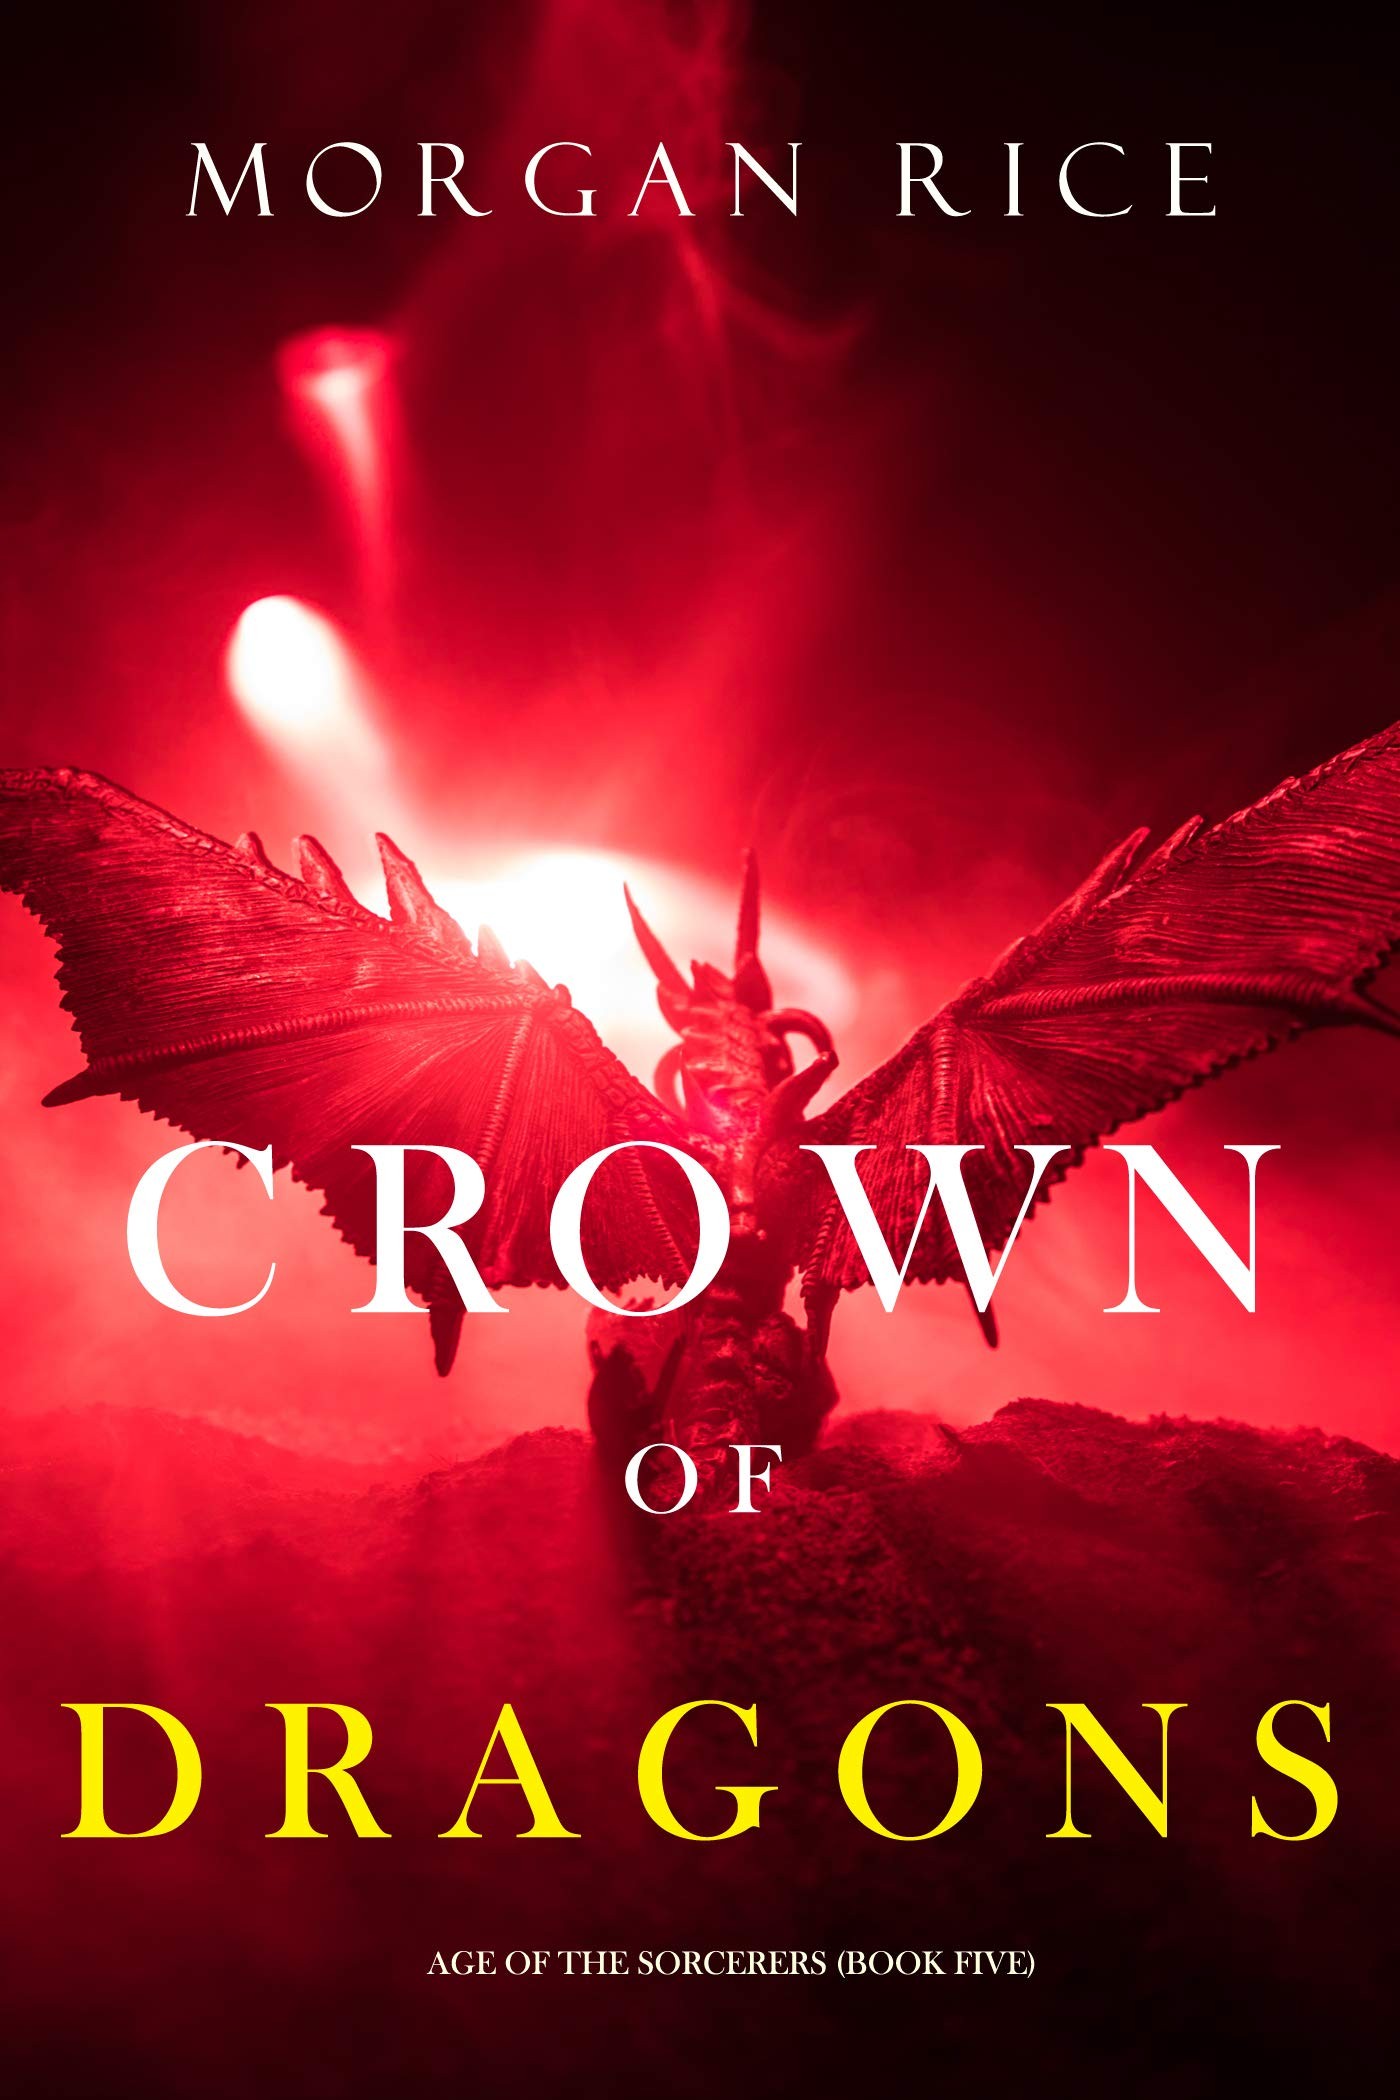 Crown of Dragons